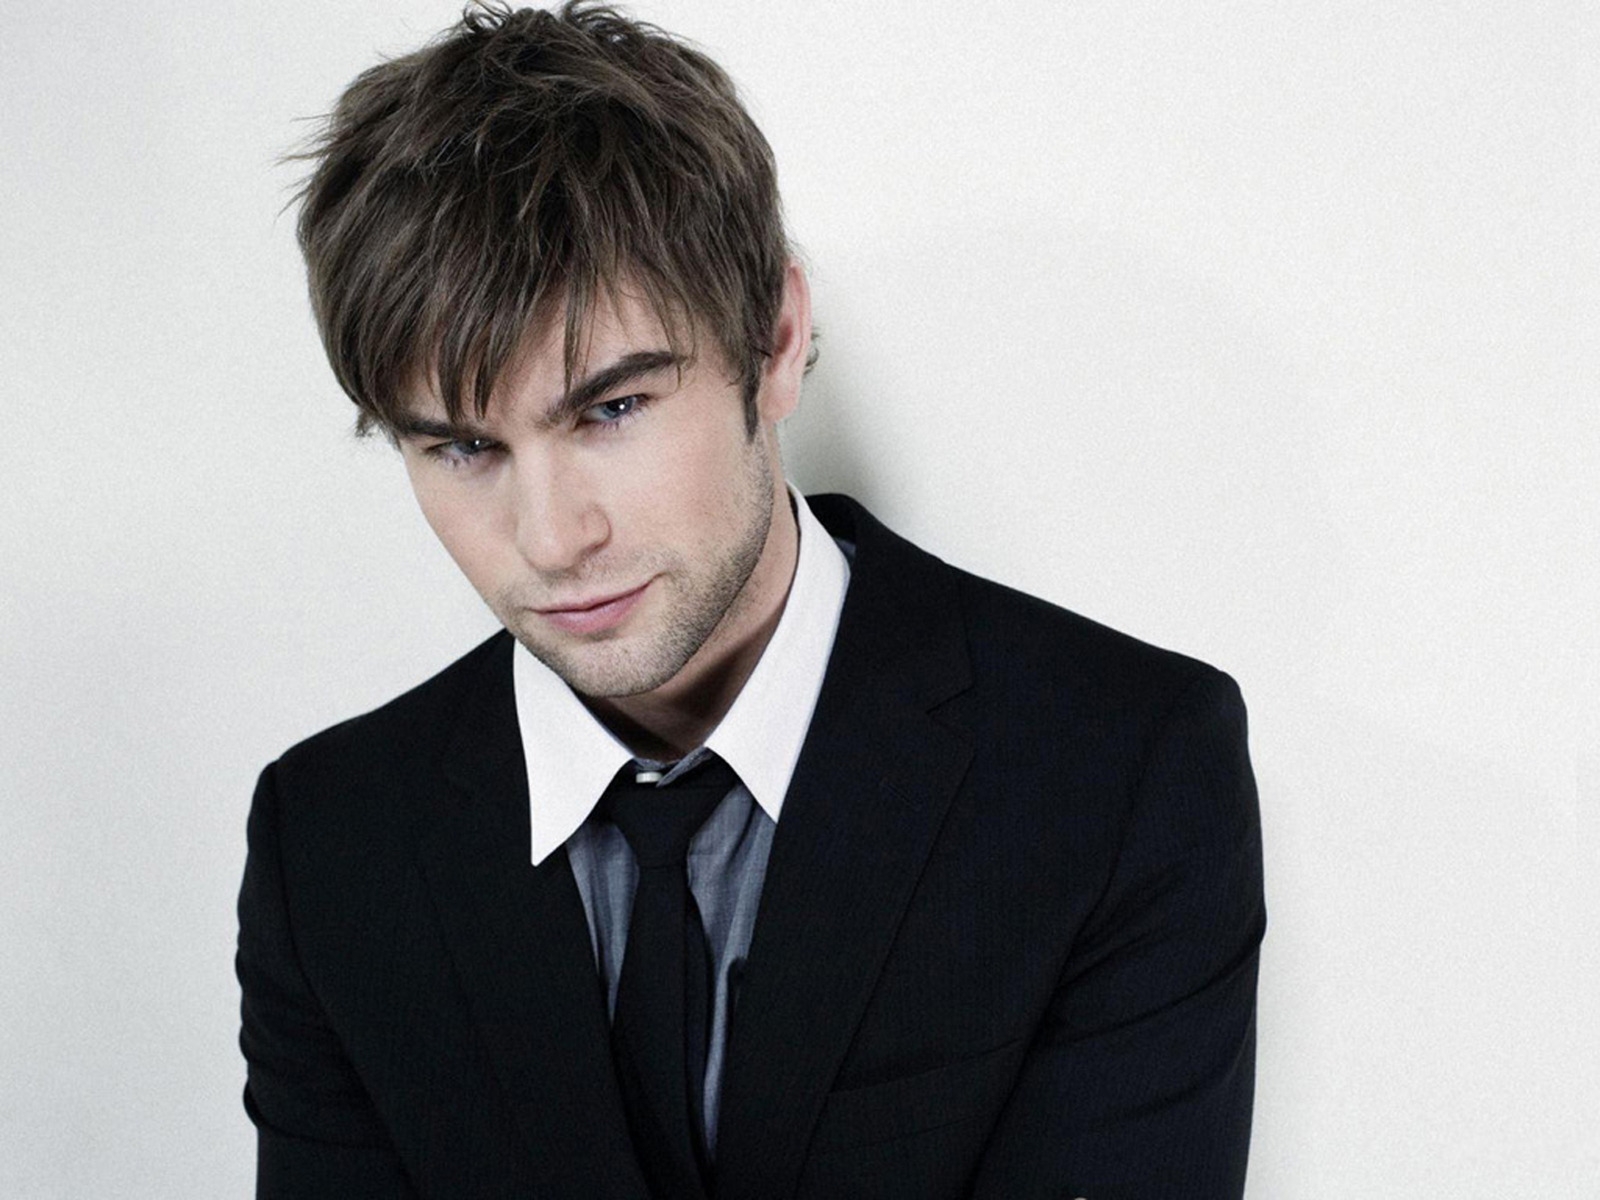 Chace Crawford for 1600 x 1200 resolution